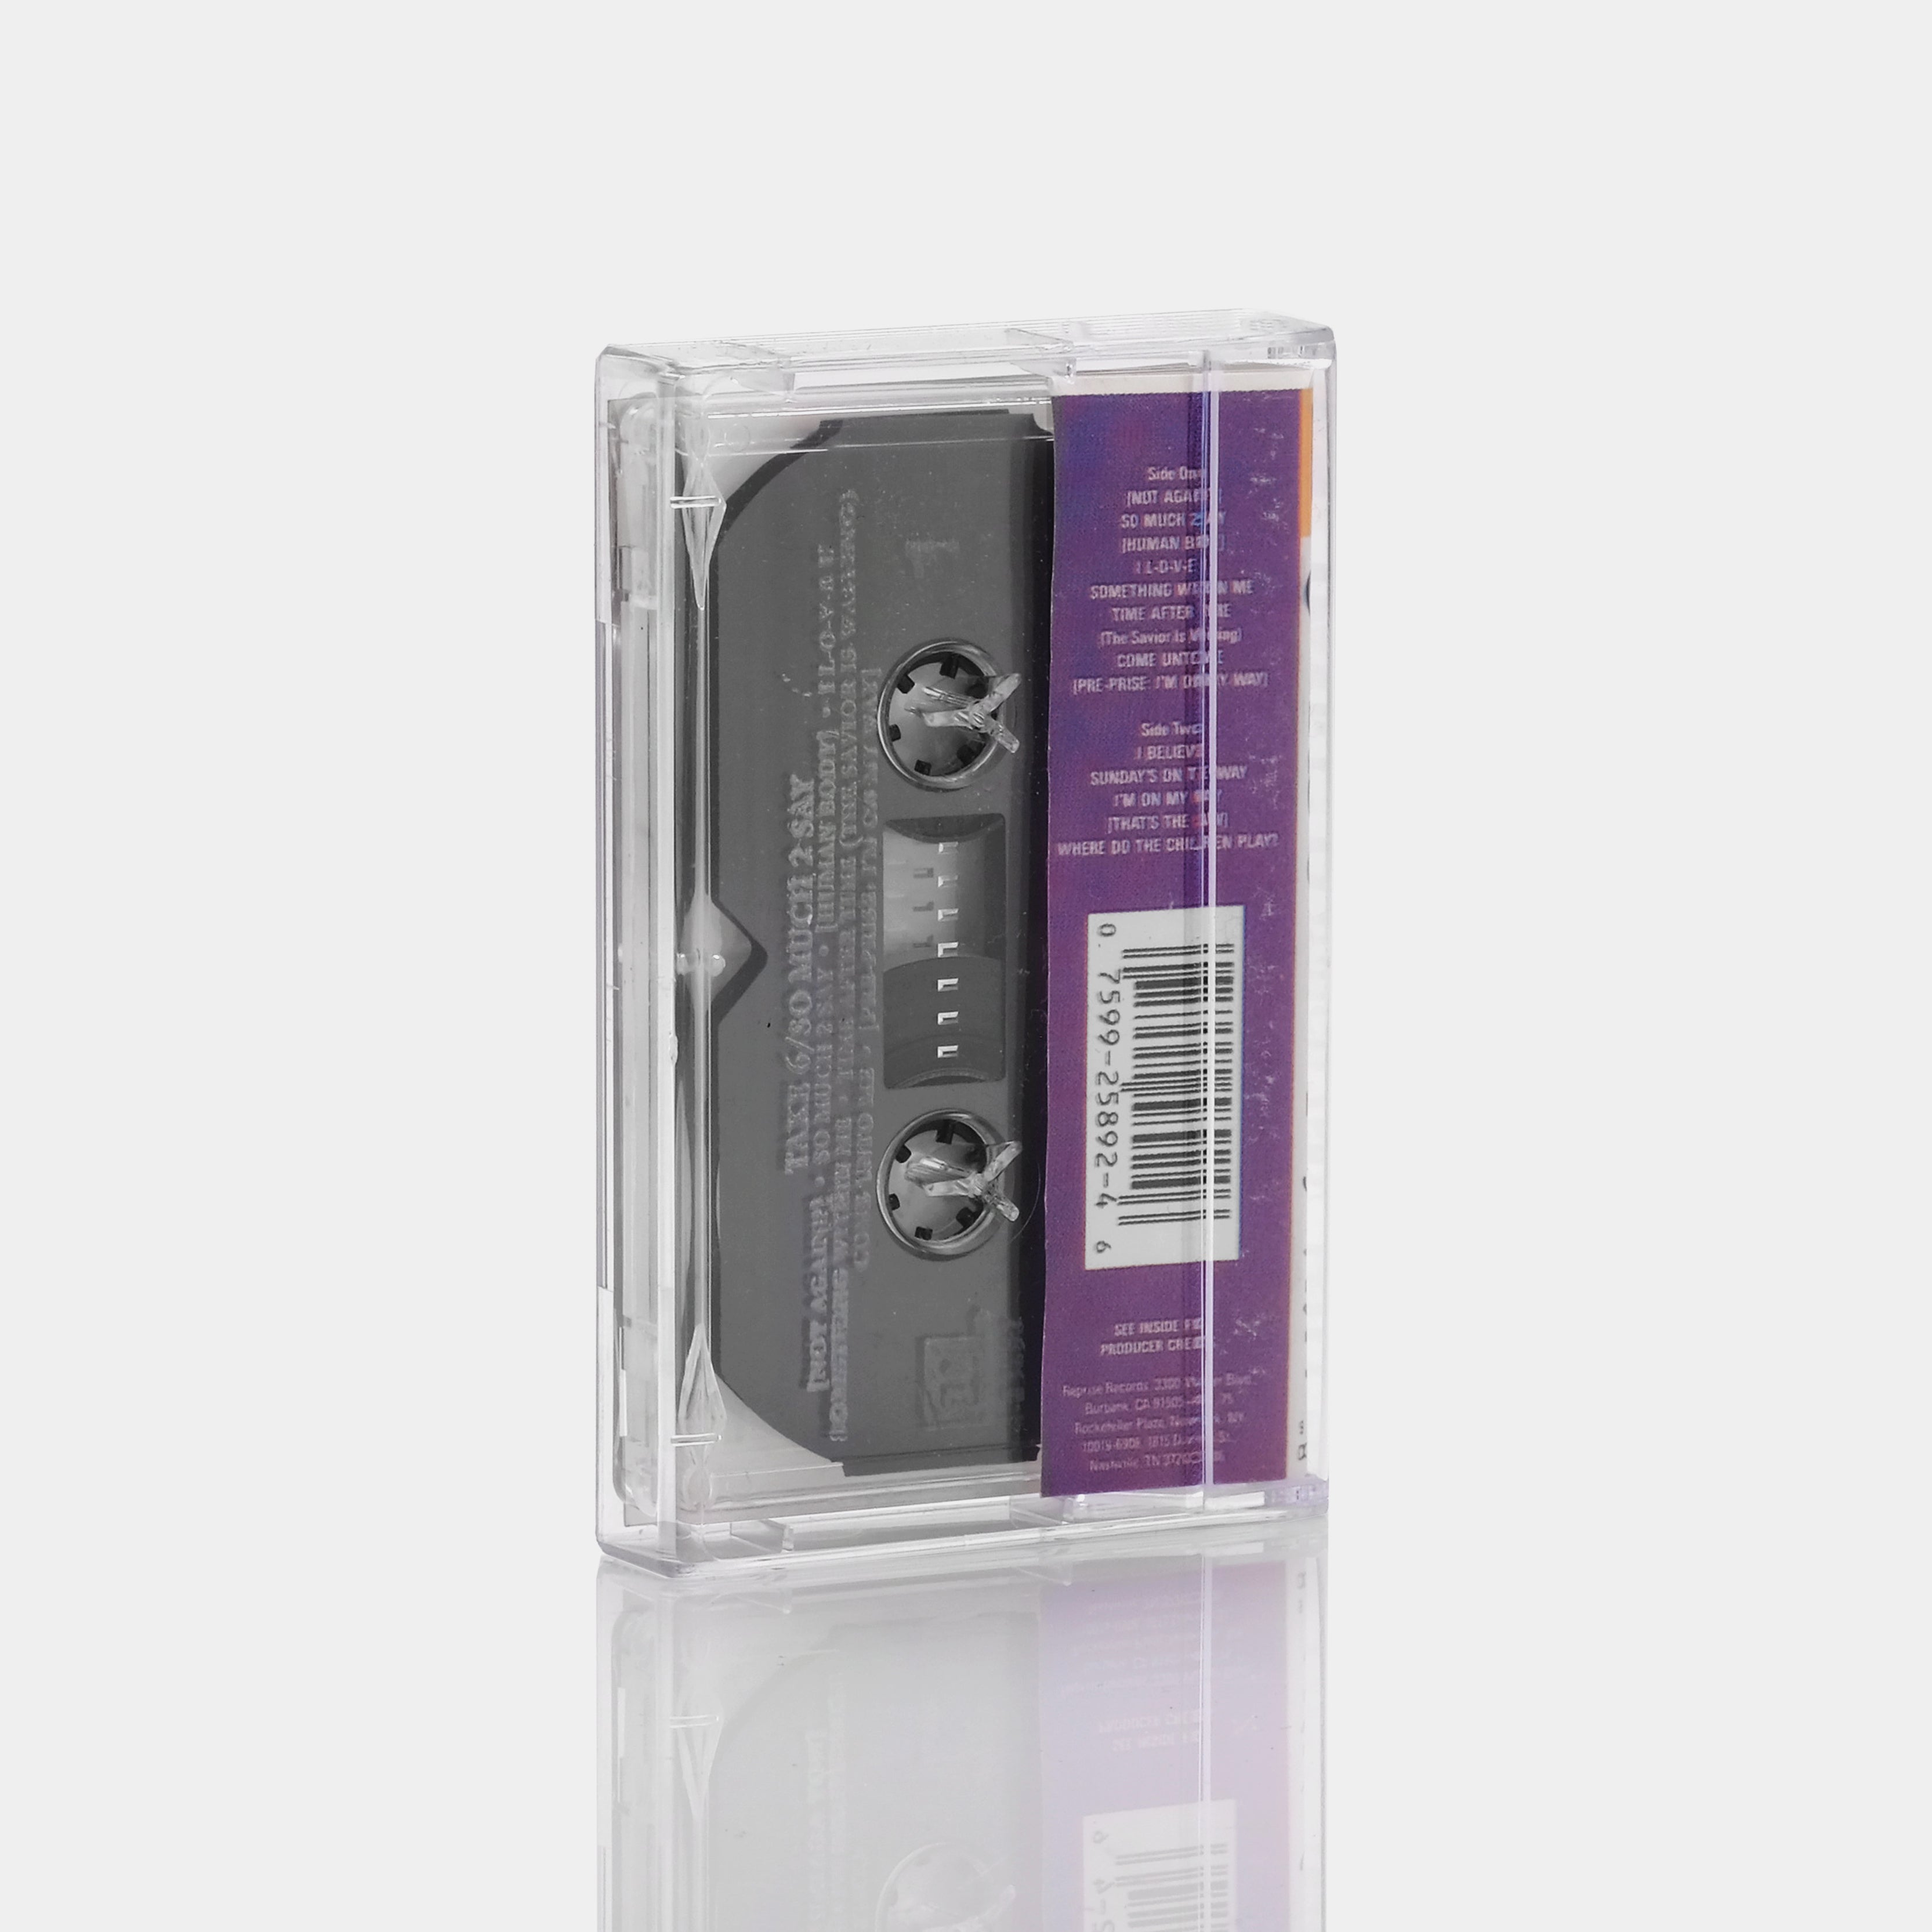 Take 6 - So Much 2 Say Cassette Tape